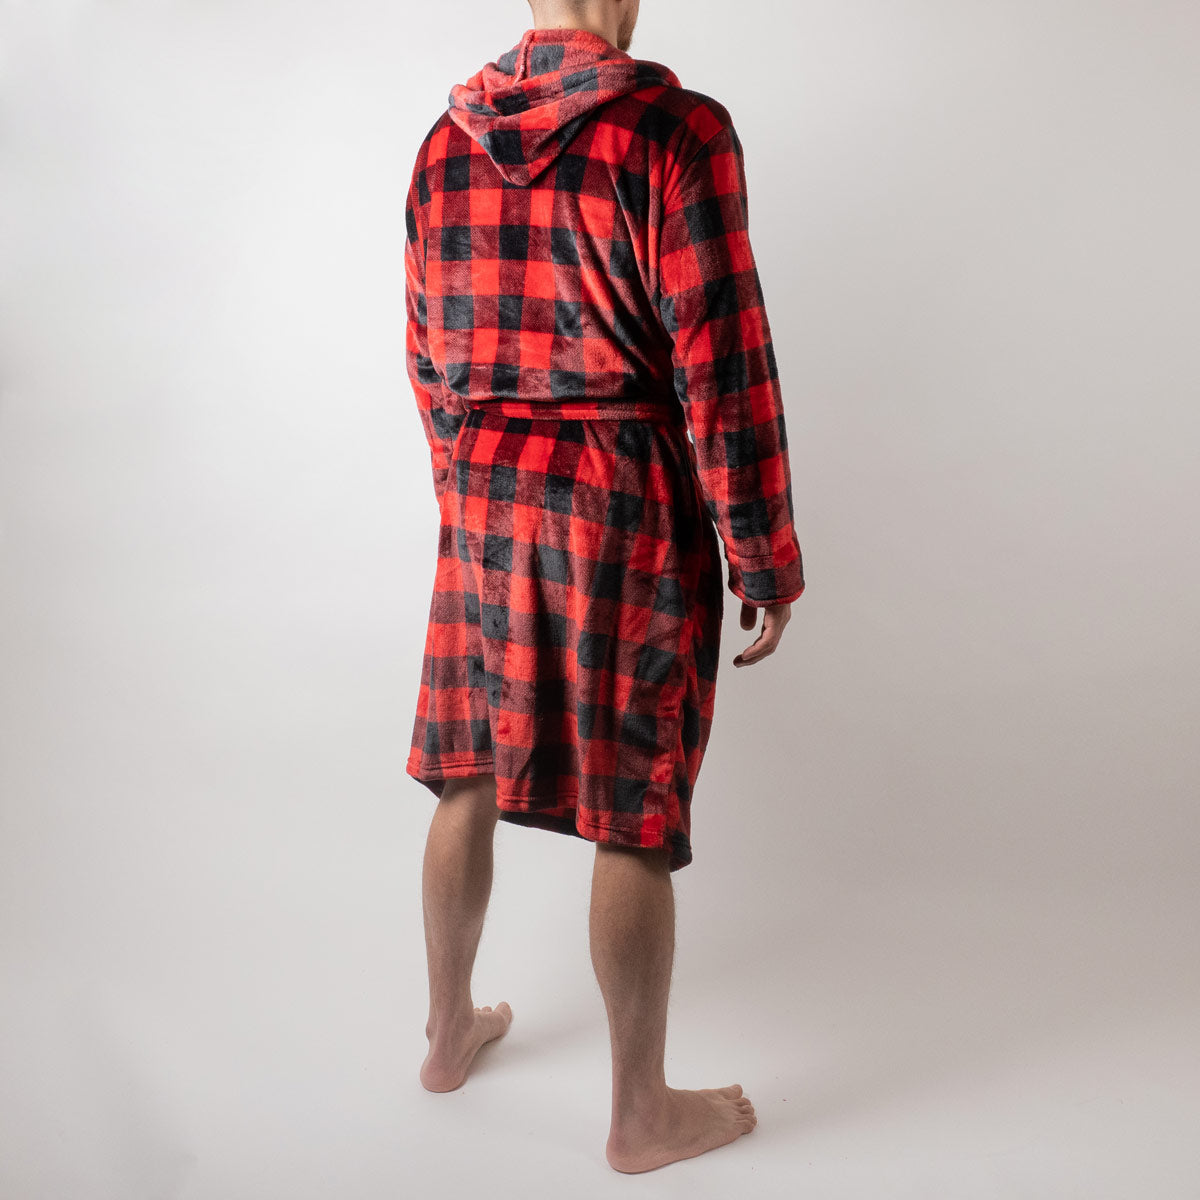 Wanted - Dressing Gown : Red Checks and Hood